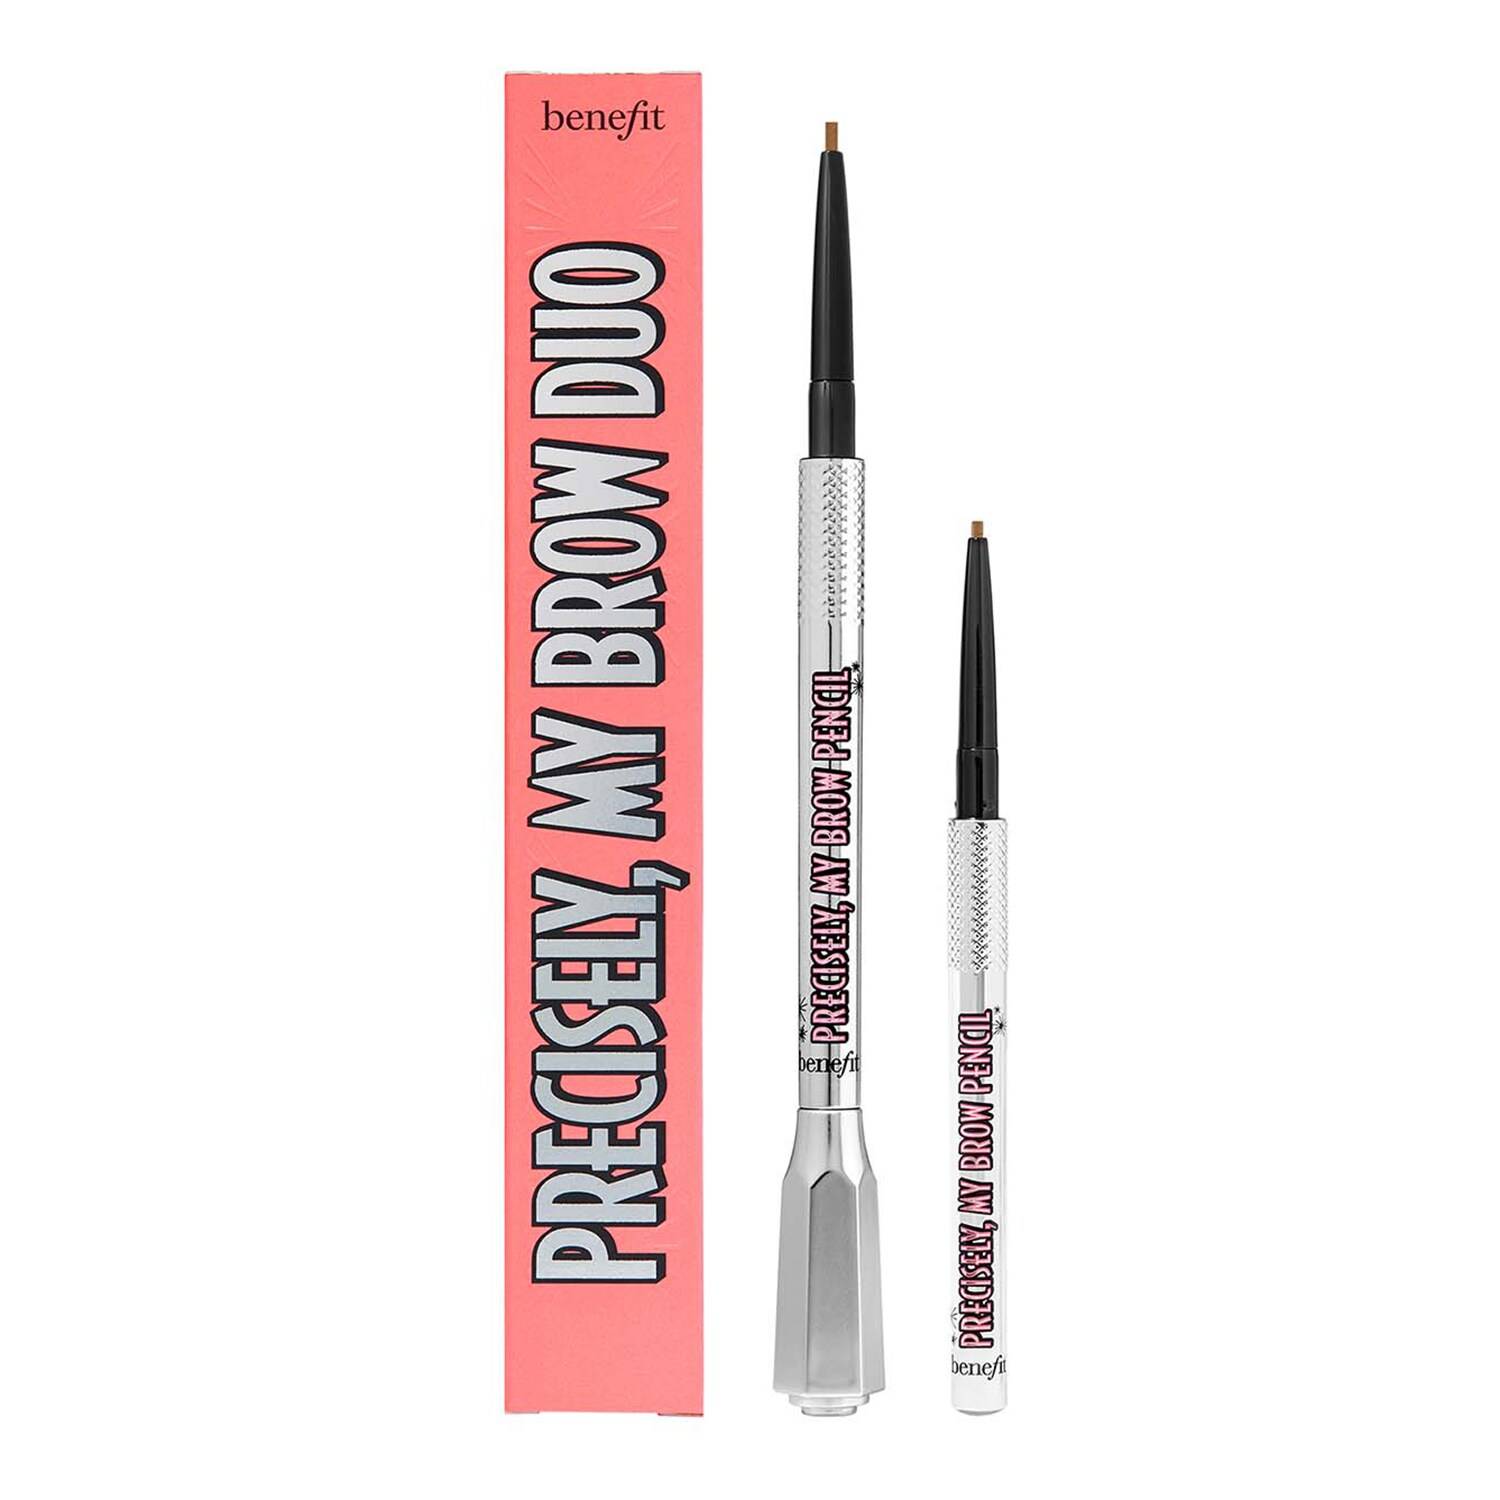 Benefit Cosmetics The Precise Pair Precisely My Brow Pencil Shade 2.5 Duo Shade 2.5